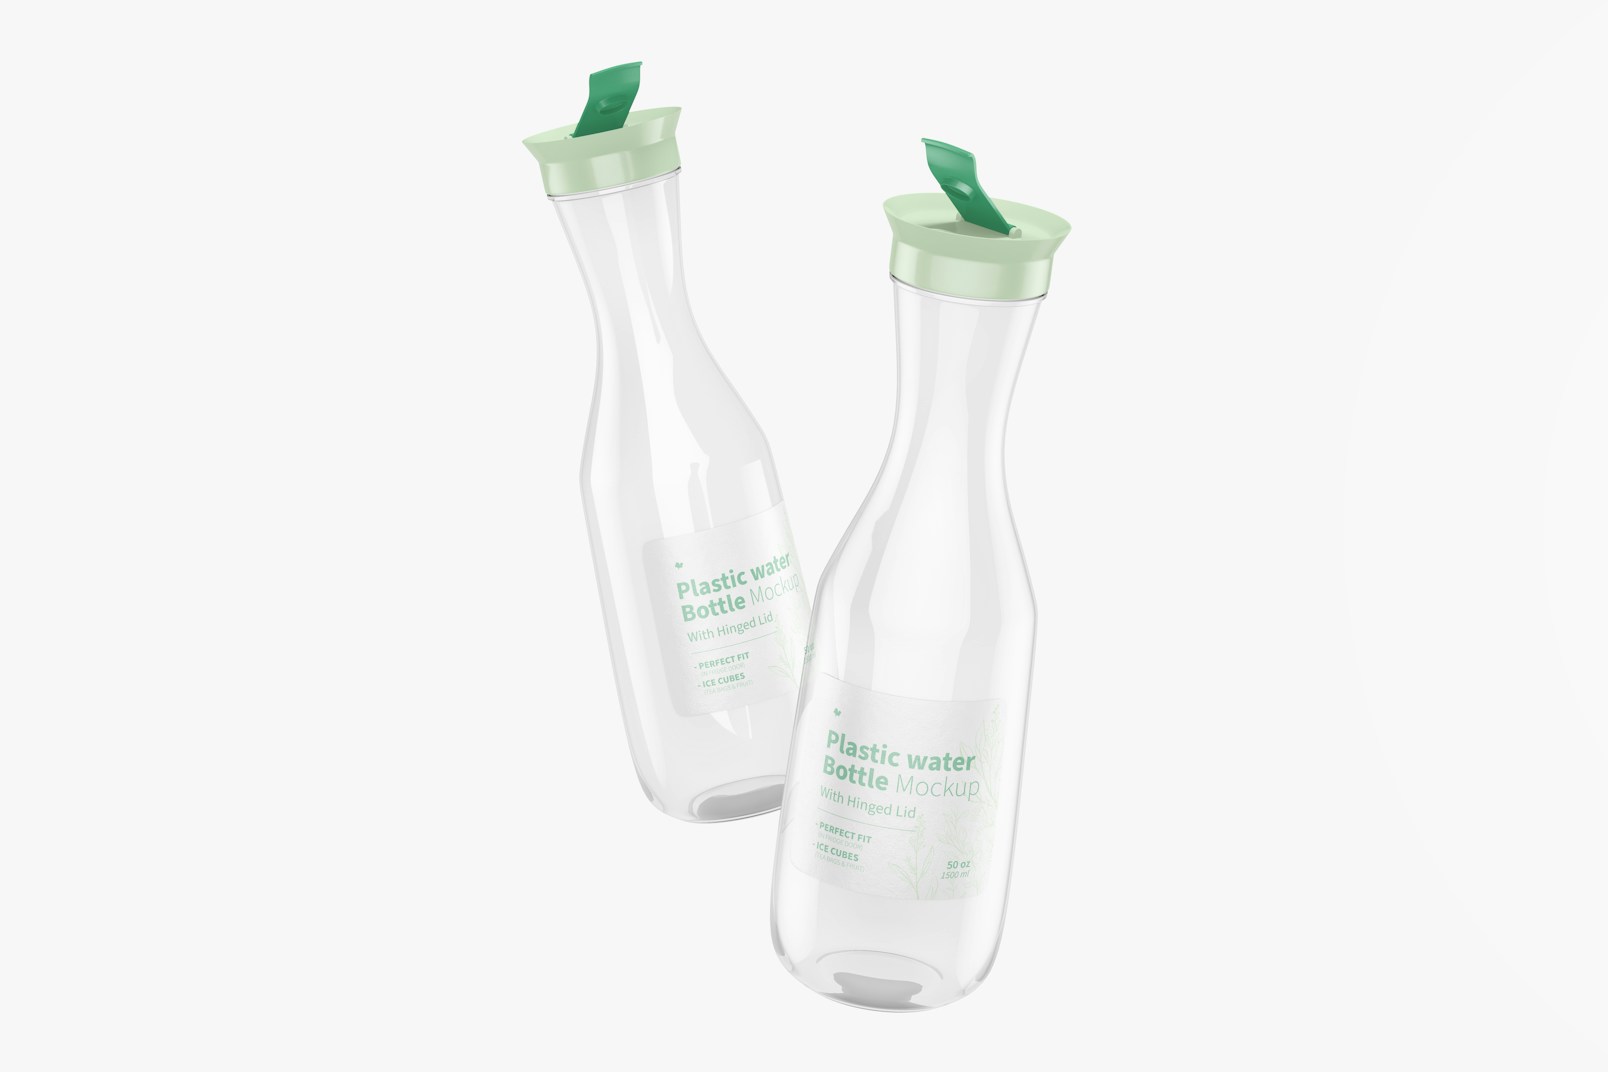 Plastic Water Bottles with Hinged Lid Mockup, Floating